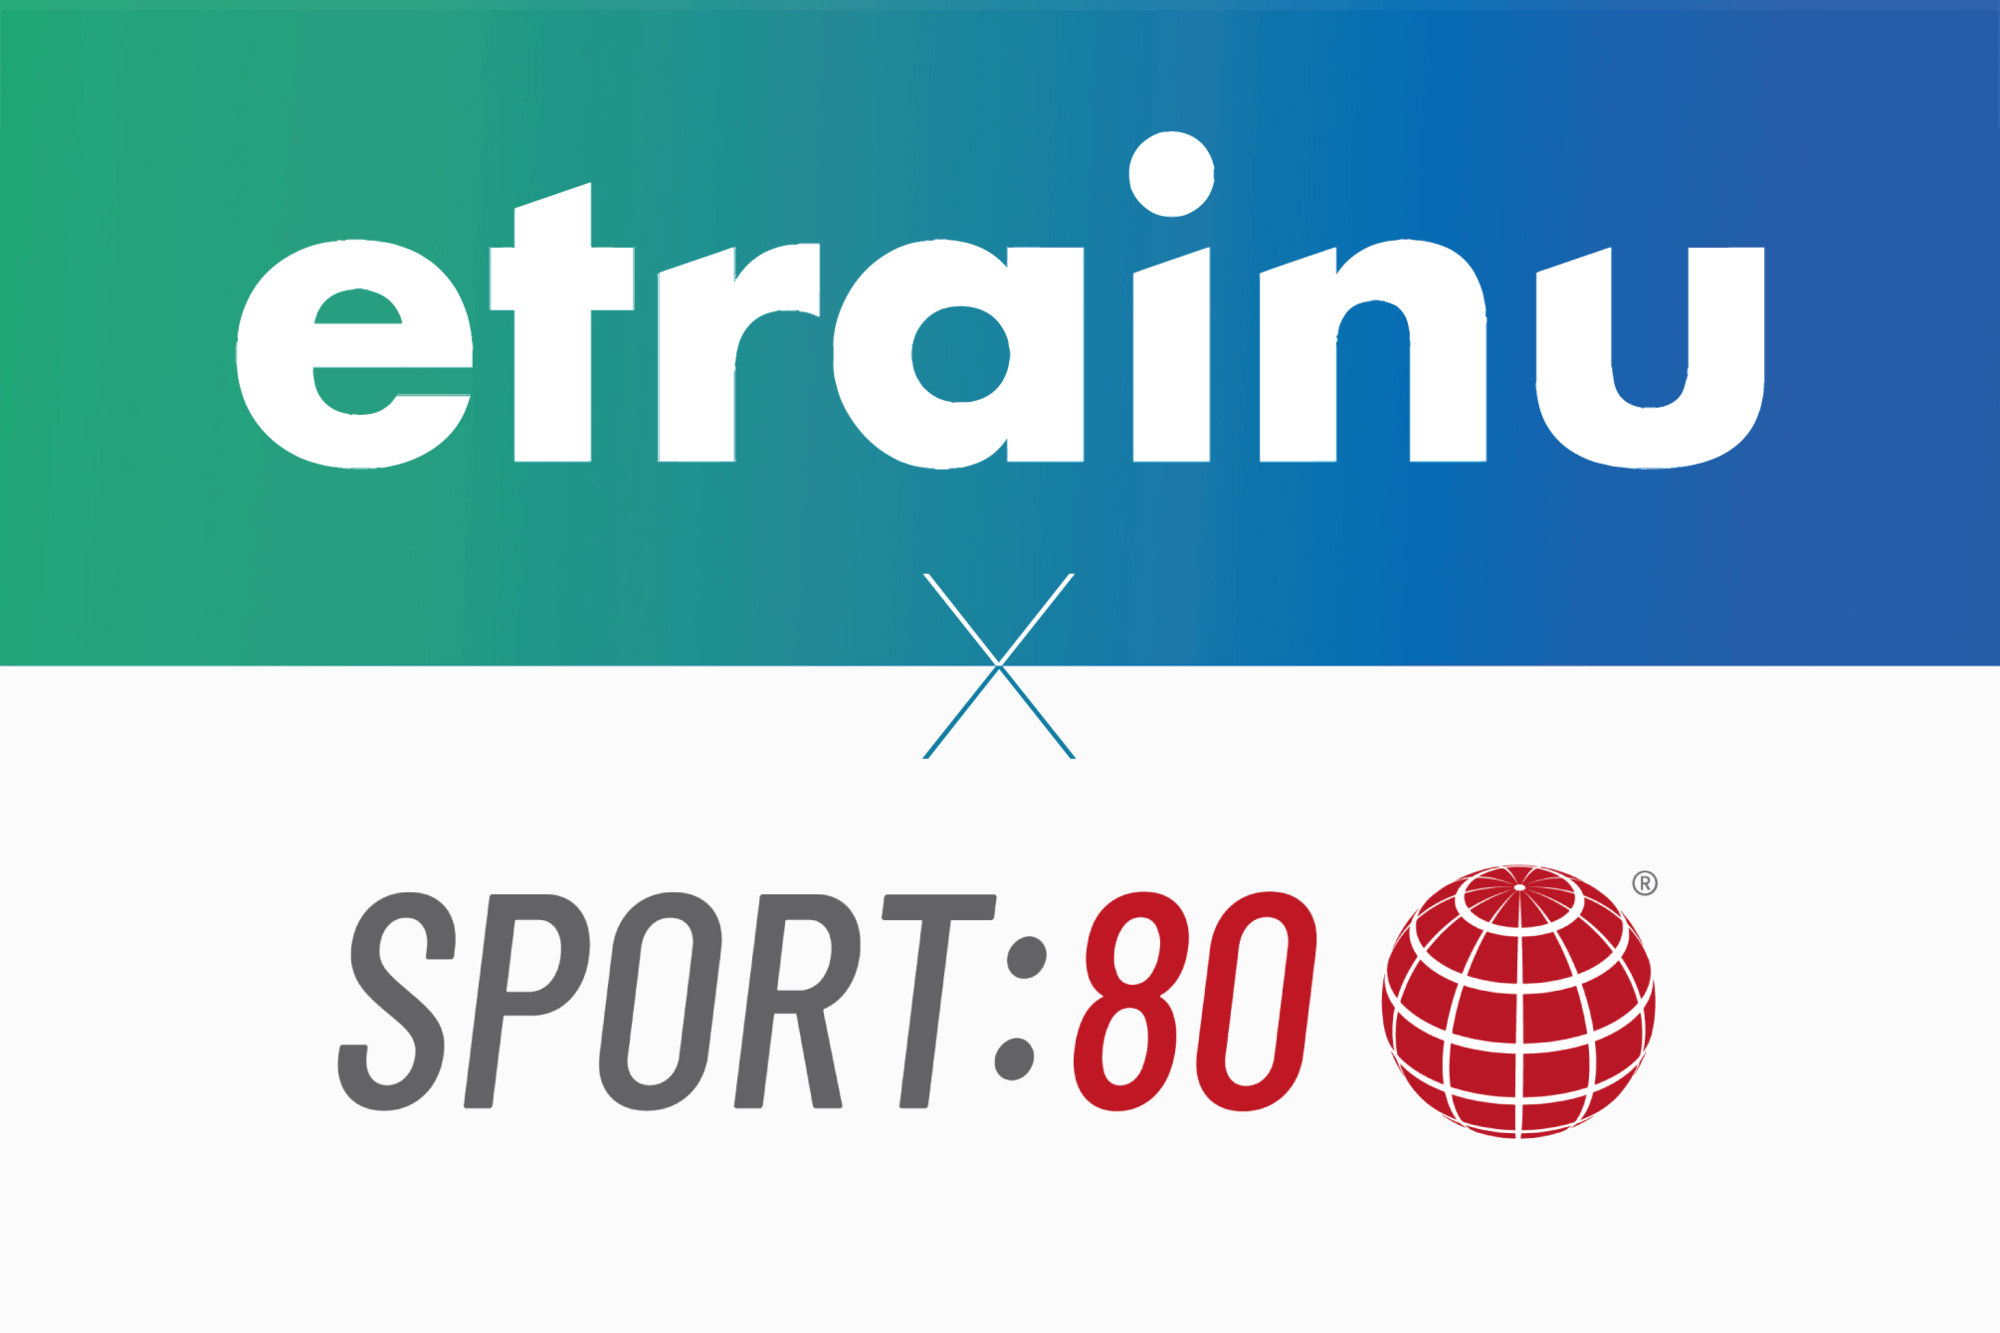 Sport:80 and etrainu discuss integration set to provide sports industry with unprecedented access to innovative online learning capabilities.